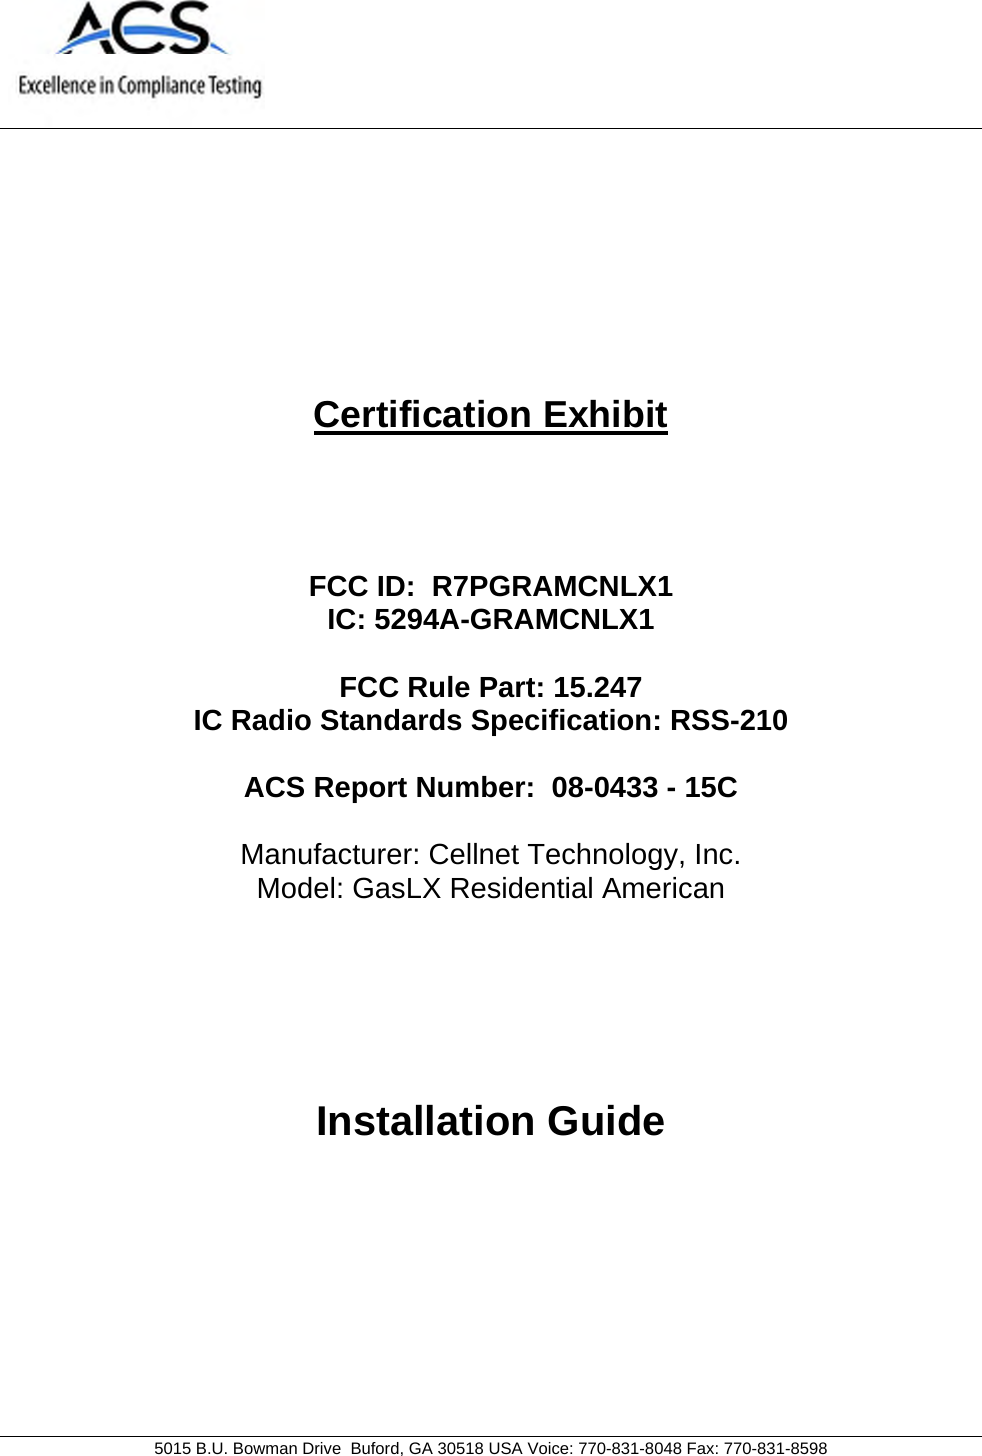     5015 B.U. Bowman Drive  Buford, GA 30518 USA Voice: 770-831-8048 Fax: 770-831-8598   Certification Exhibit     FCC ID:  R7PGRAMCNLX1 IC: 5294A-GRAMCNLX1  FCC Rule Part: 15.247 IC Radio Standards Specification: RSS-210  ACS Report Number:  08-0433 - 15C   Manufacturer: Cellnet Technology, Inc. Model: GasLX Residential American     Installation Guide  